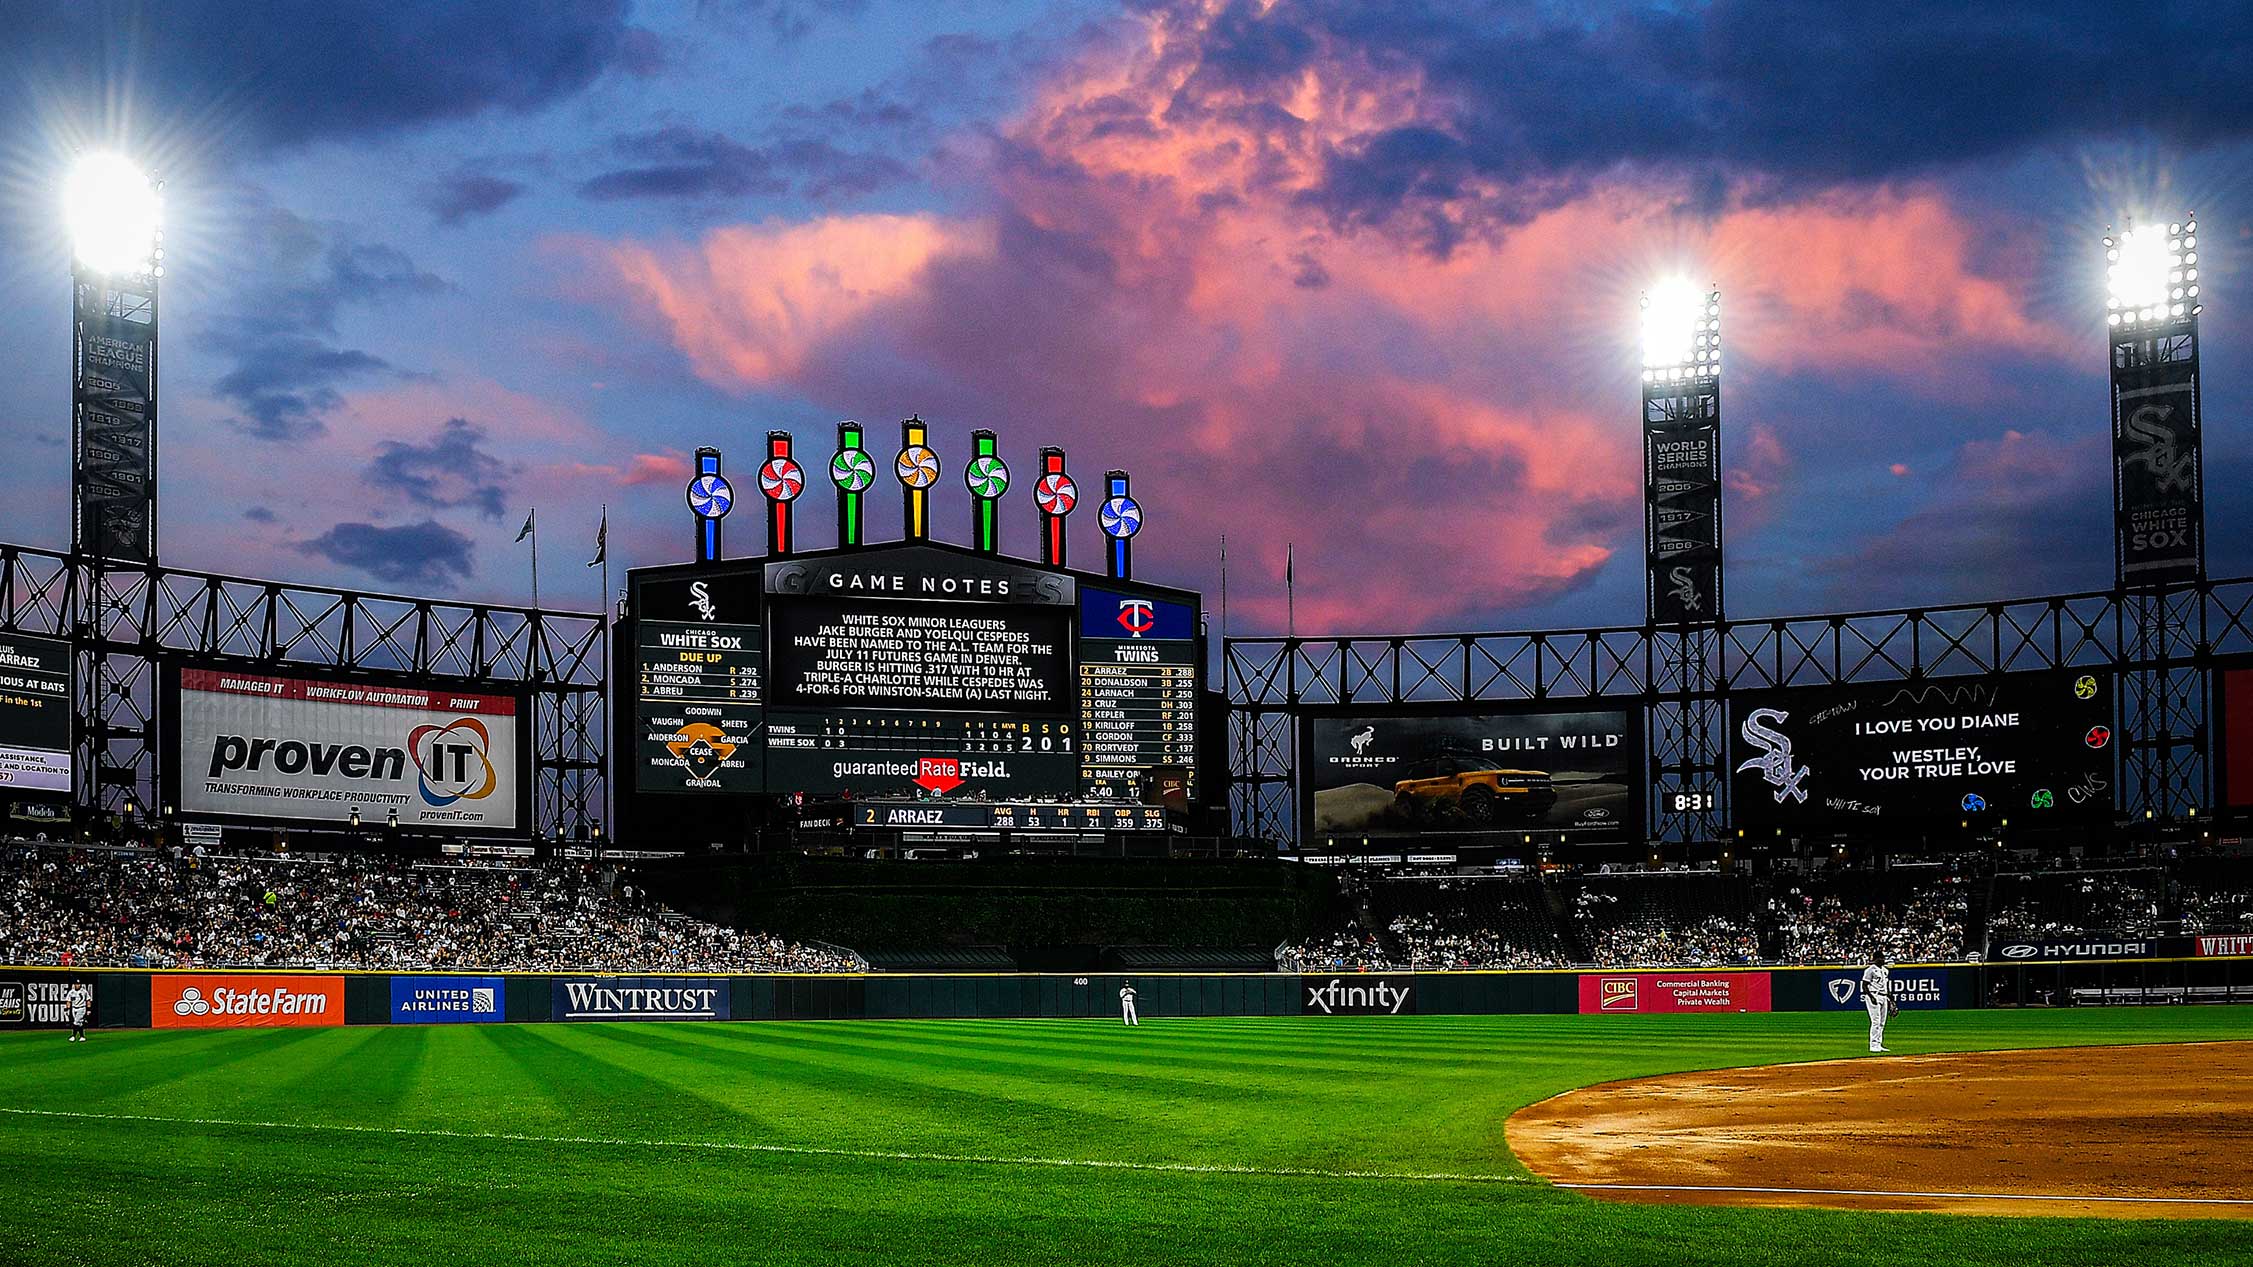 White Sox's U.S. Cellular Field changing name to Guaranteed Rate Field